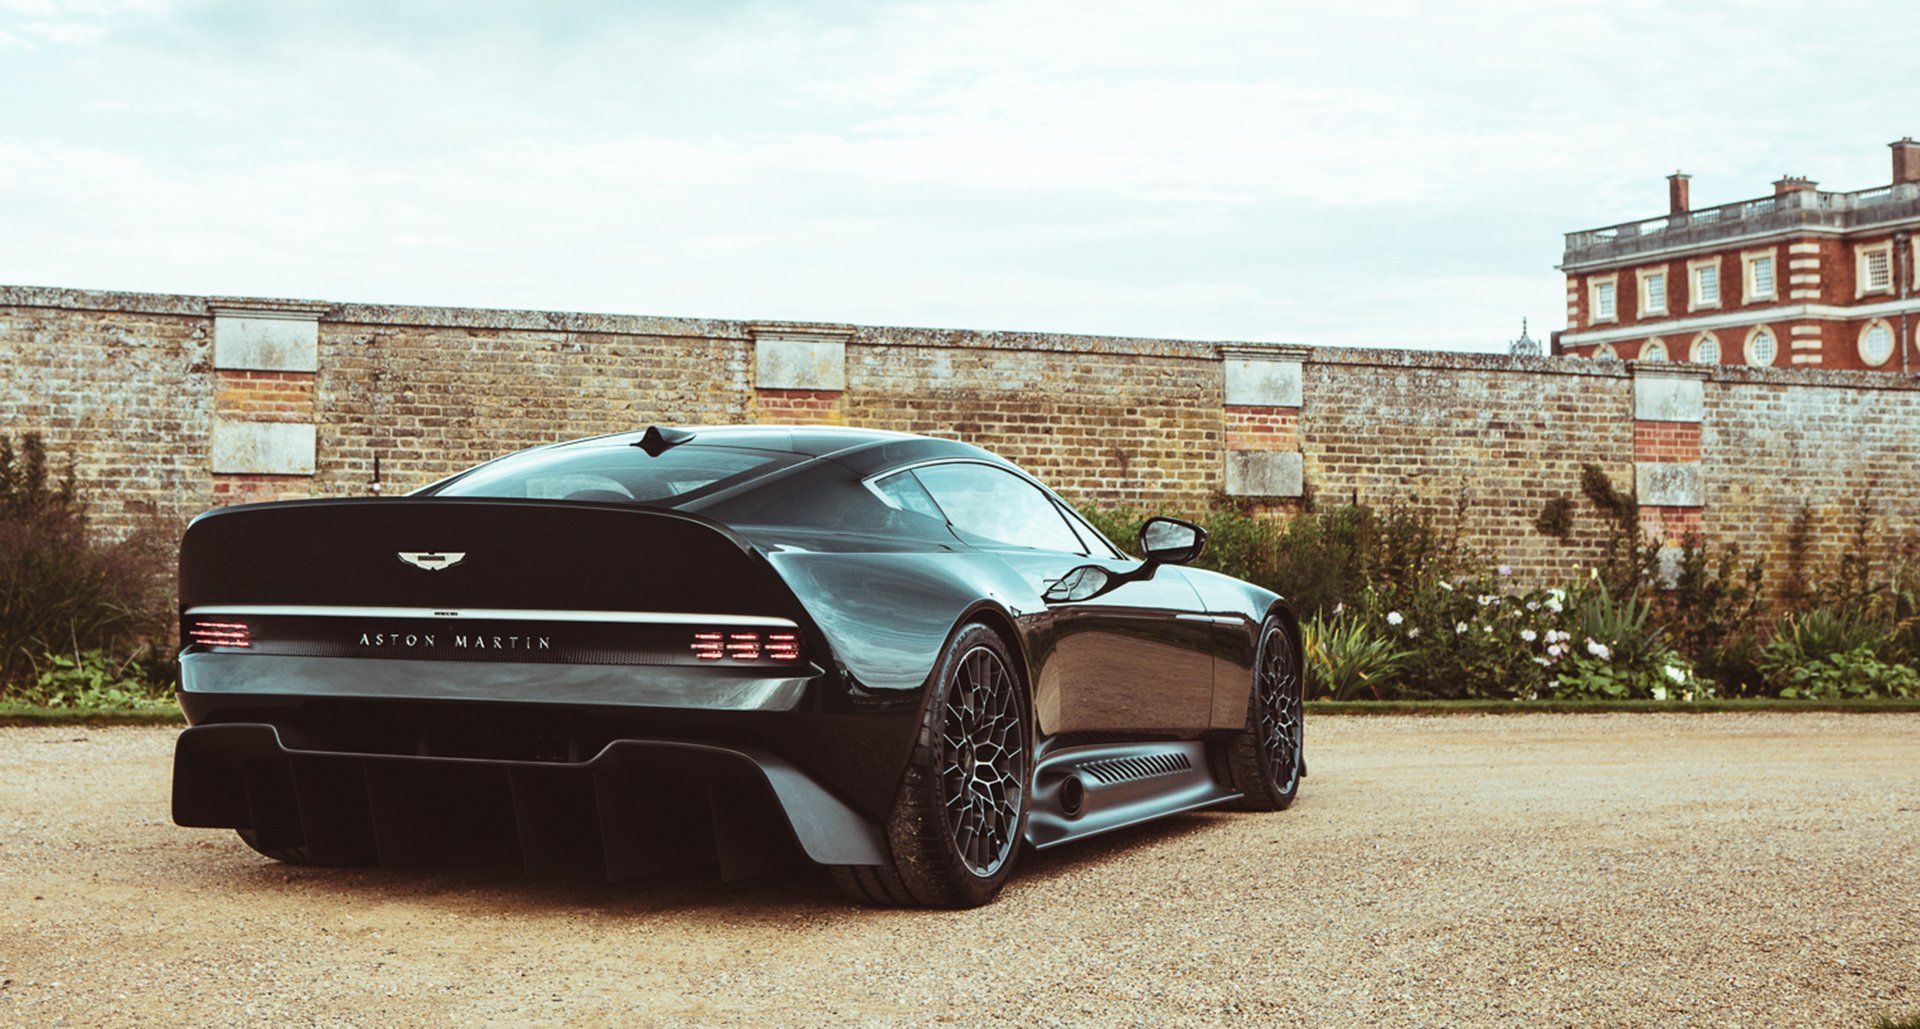 Aston Martin Victor: 1 of 1 Hypercar Built from Vulcan and One-77 Parts